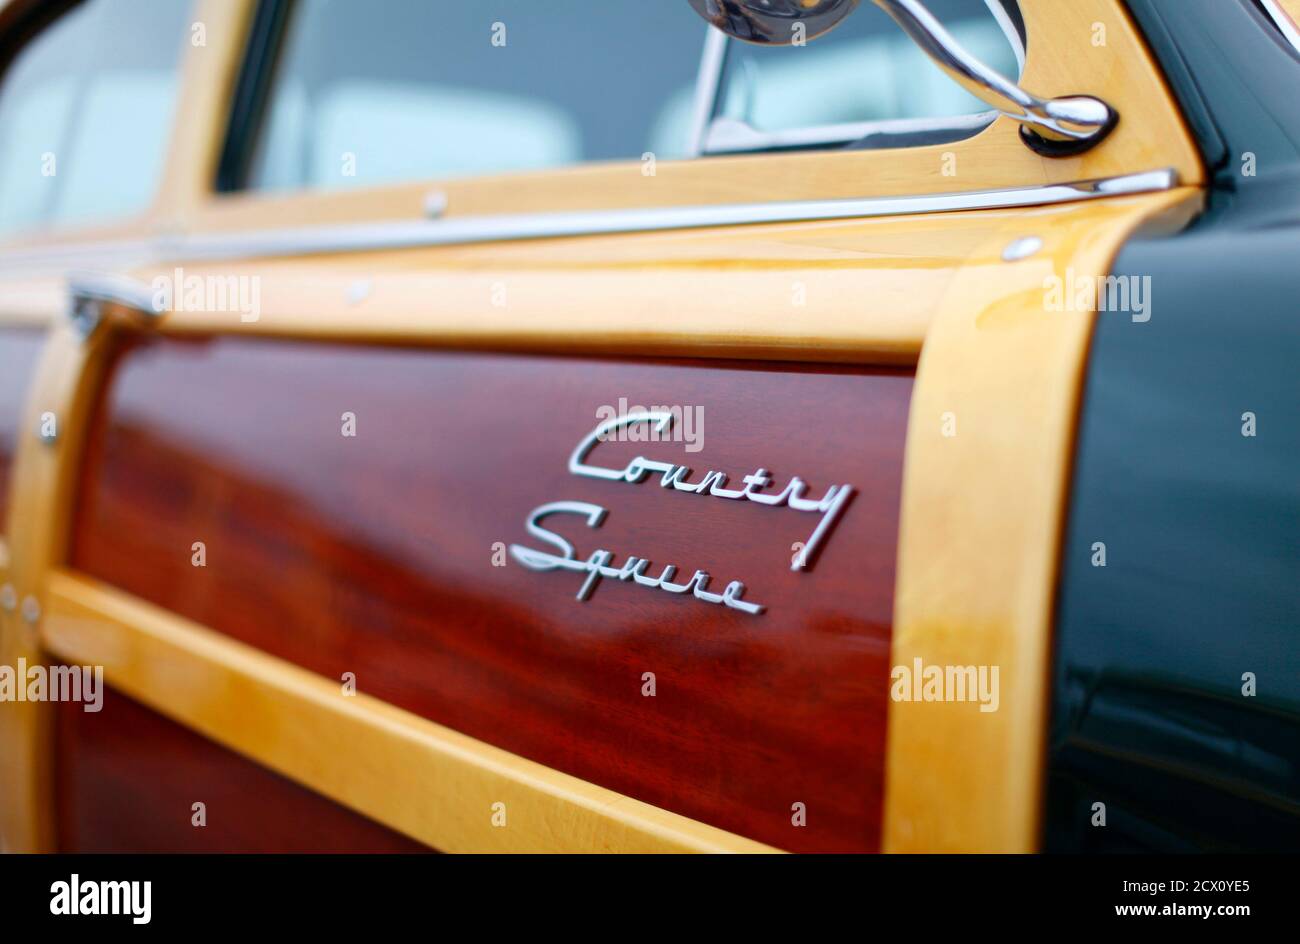 A Country Squire passenger door is shown at the the world's largest gathering of wooden bodied automobiles in Encinitas, California September 17, 2011. The event known as 'Wavecrest' is in its 31st year and attracts over 300 woodies and their owners from across the United States.  REUTERS/Mike Blake    (UNITED STATES - Tags: TRANSPORT SOCIETY) Stock Photo